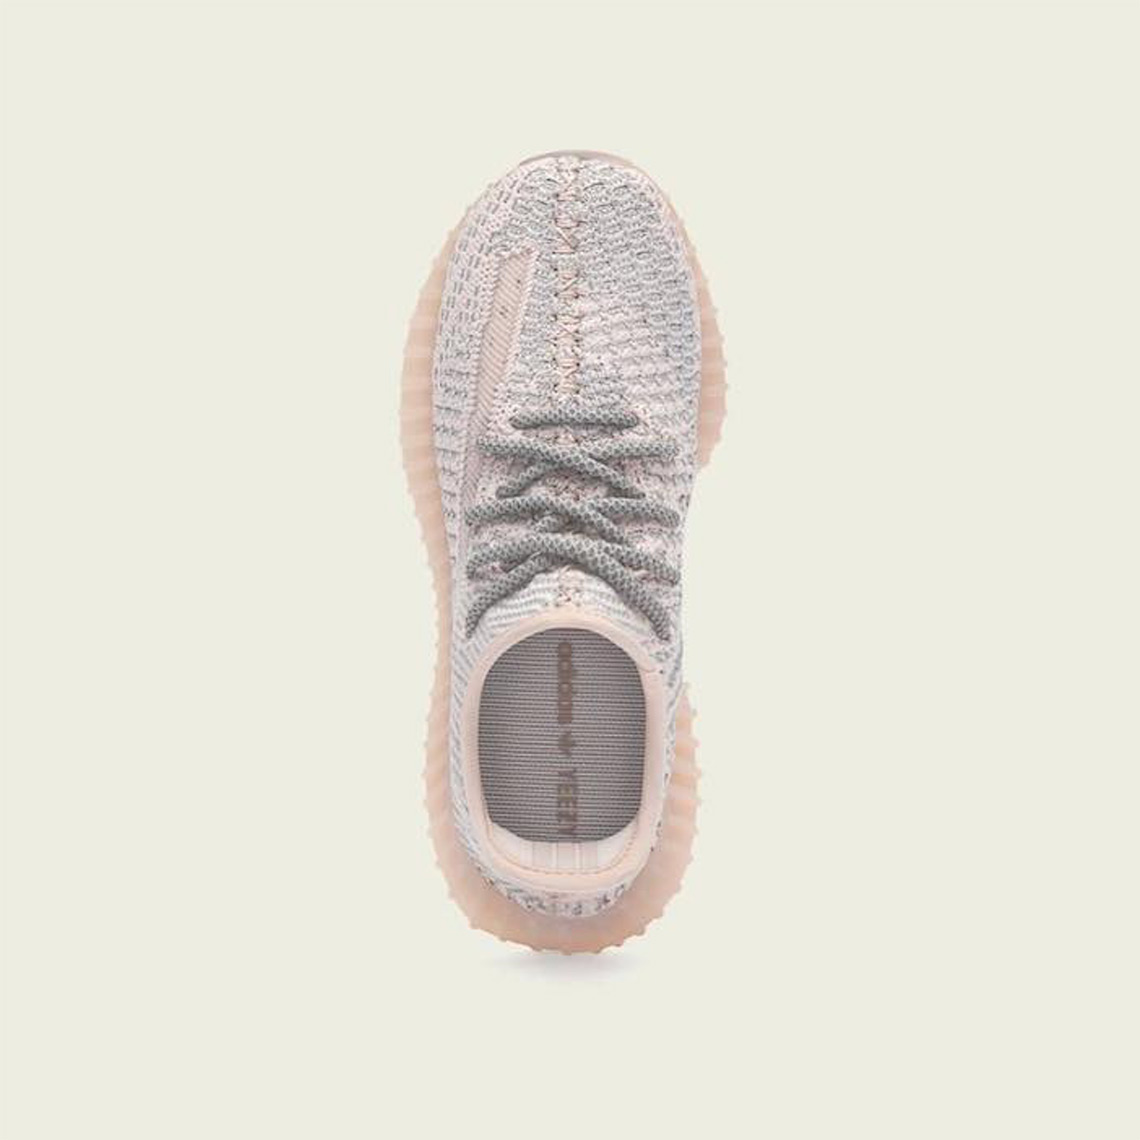 adidas Yeezy exercise 350 synth release date 4